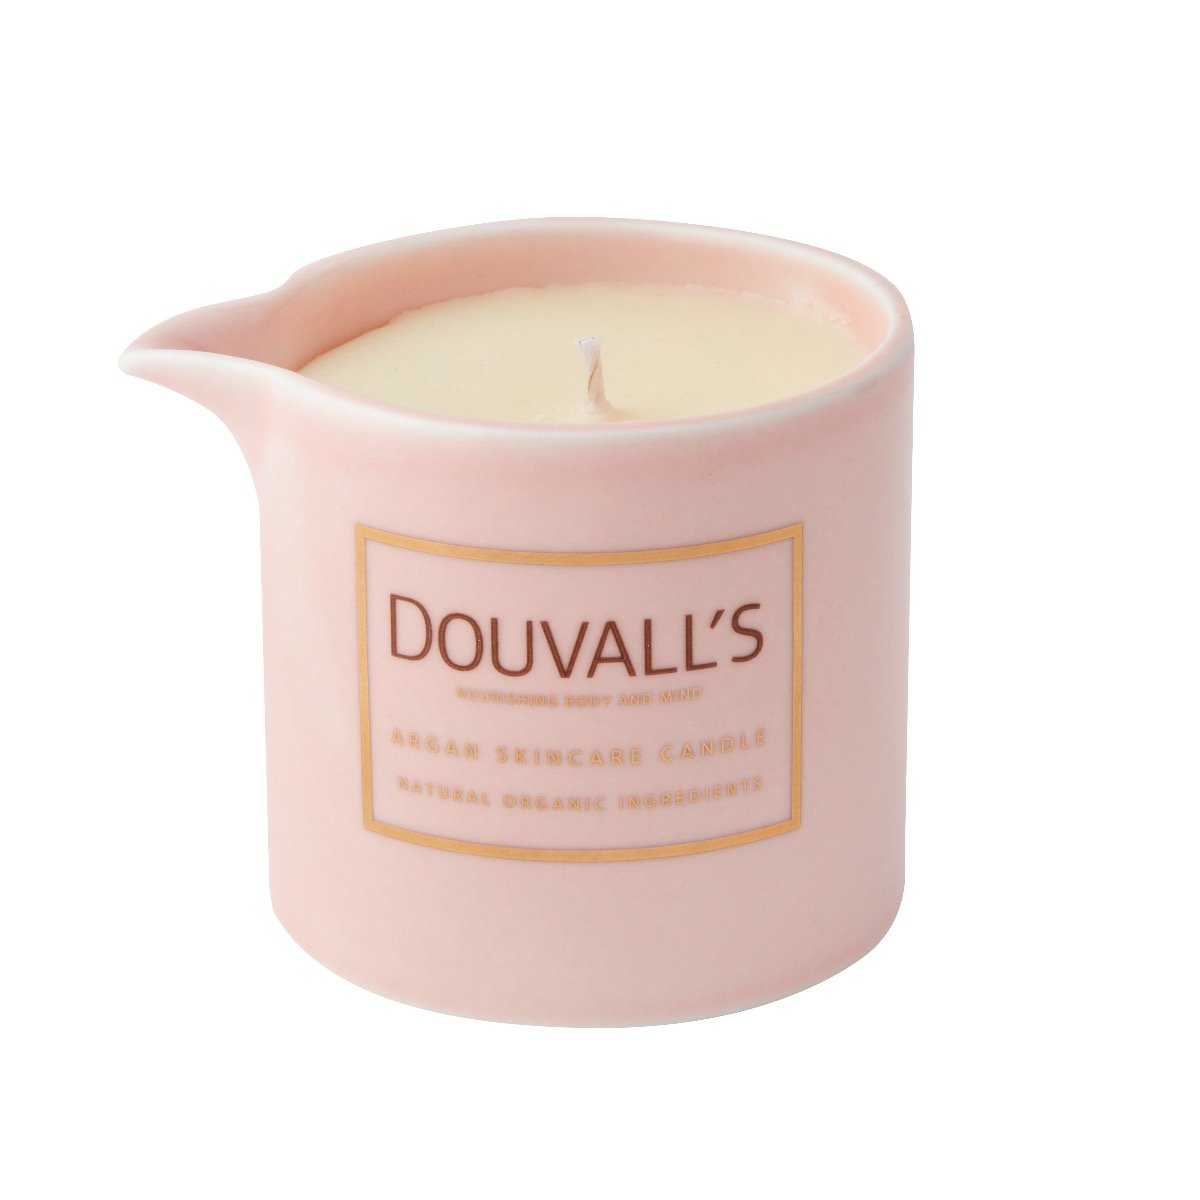 douvalls_candle_a_1_1.jpg